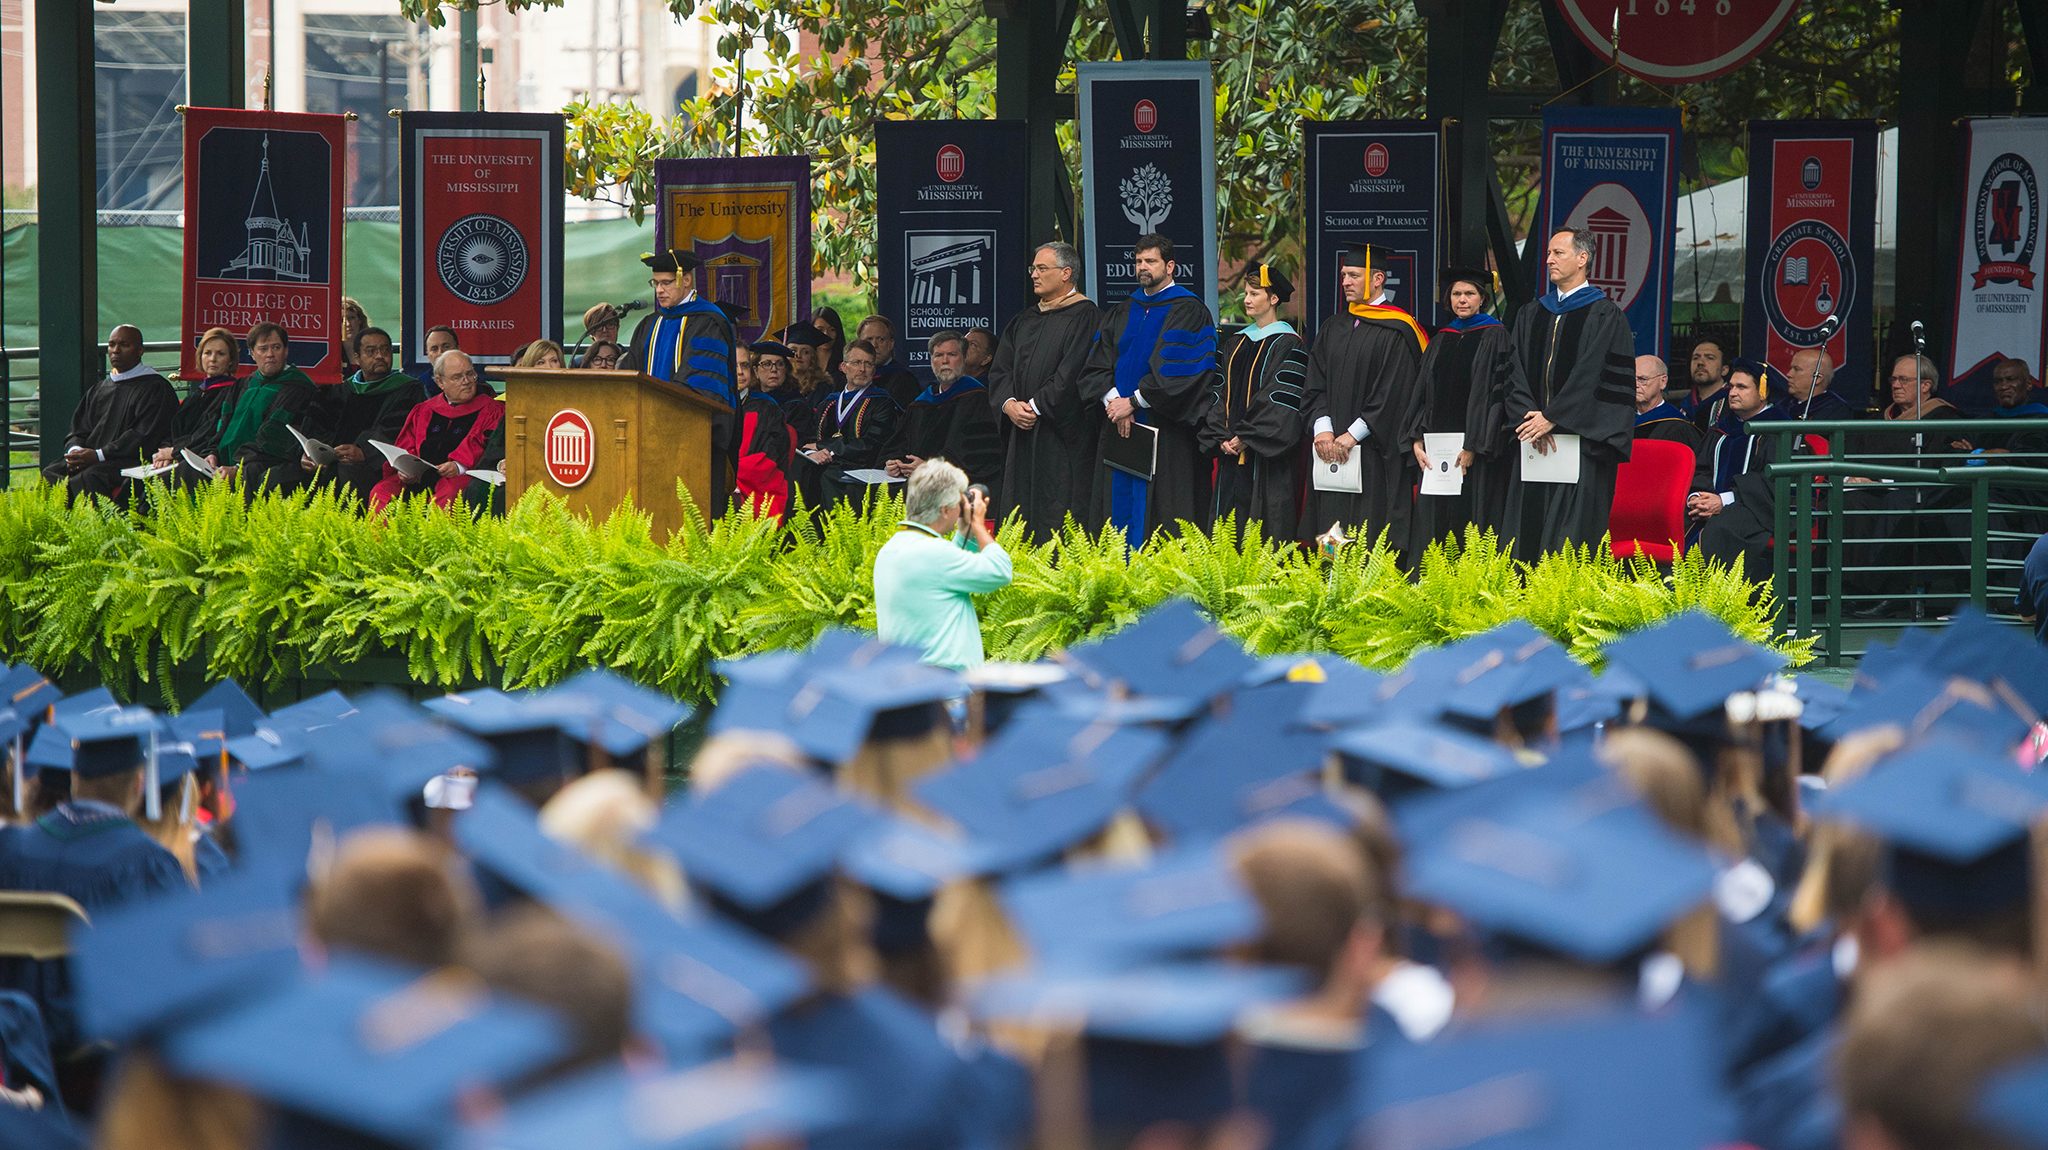 UM's 165th Commencement Set this Weekend Ole Miss News